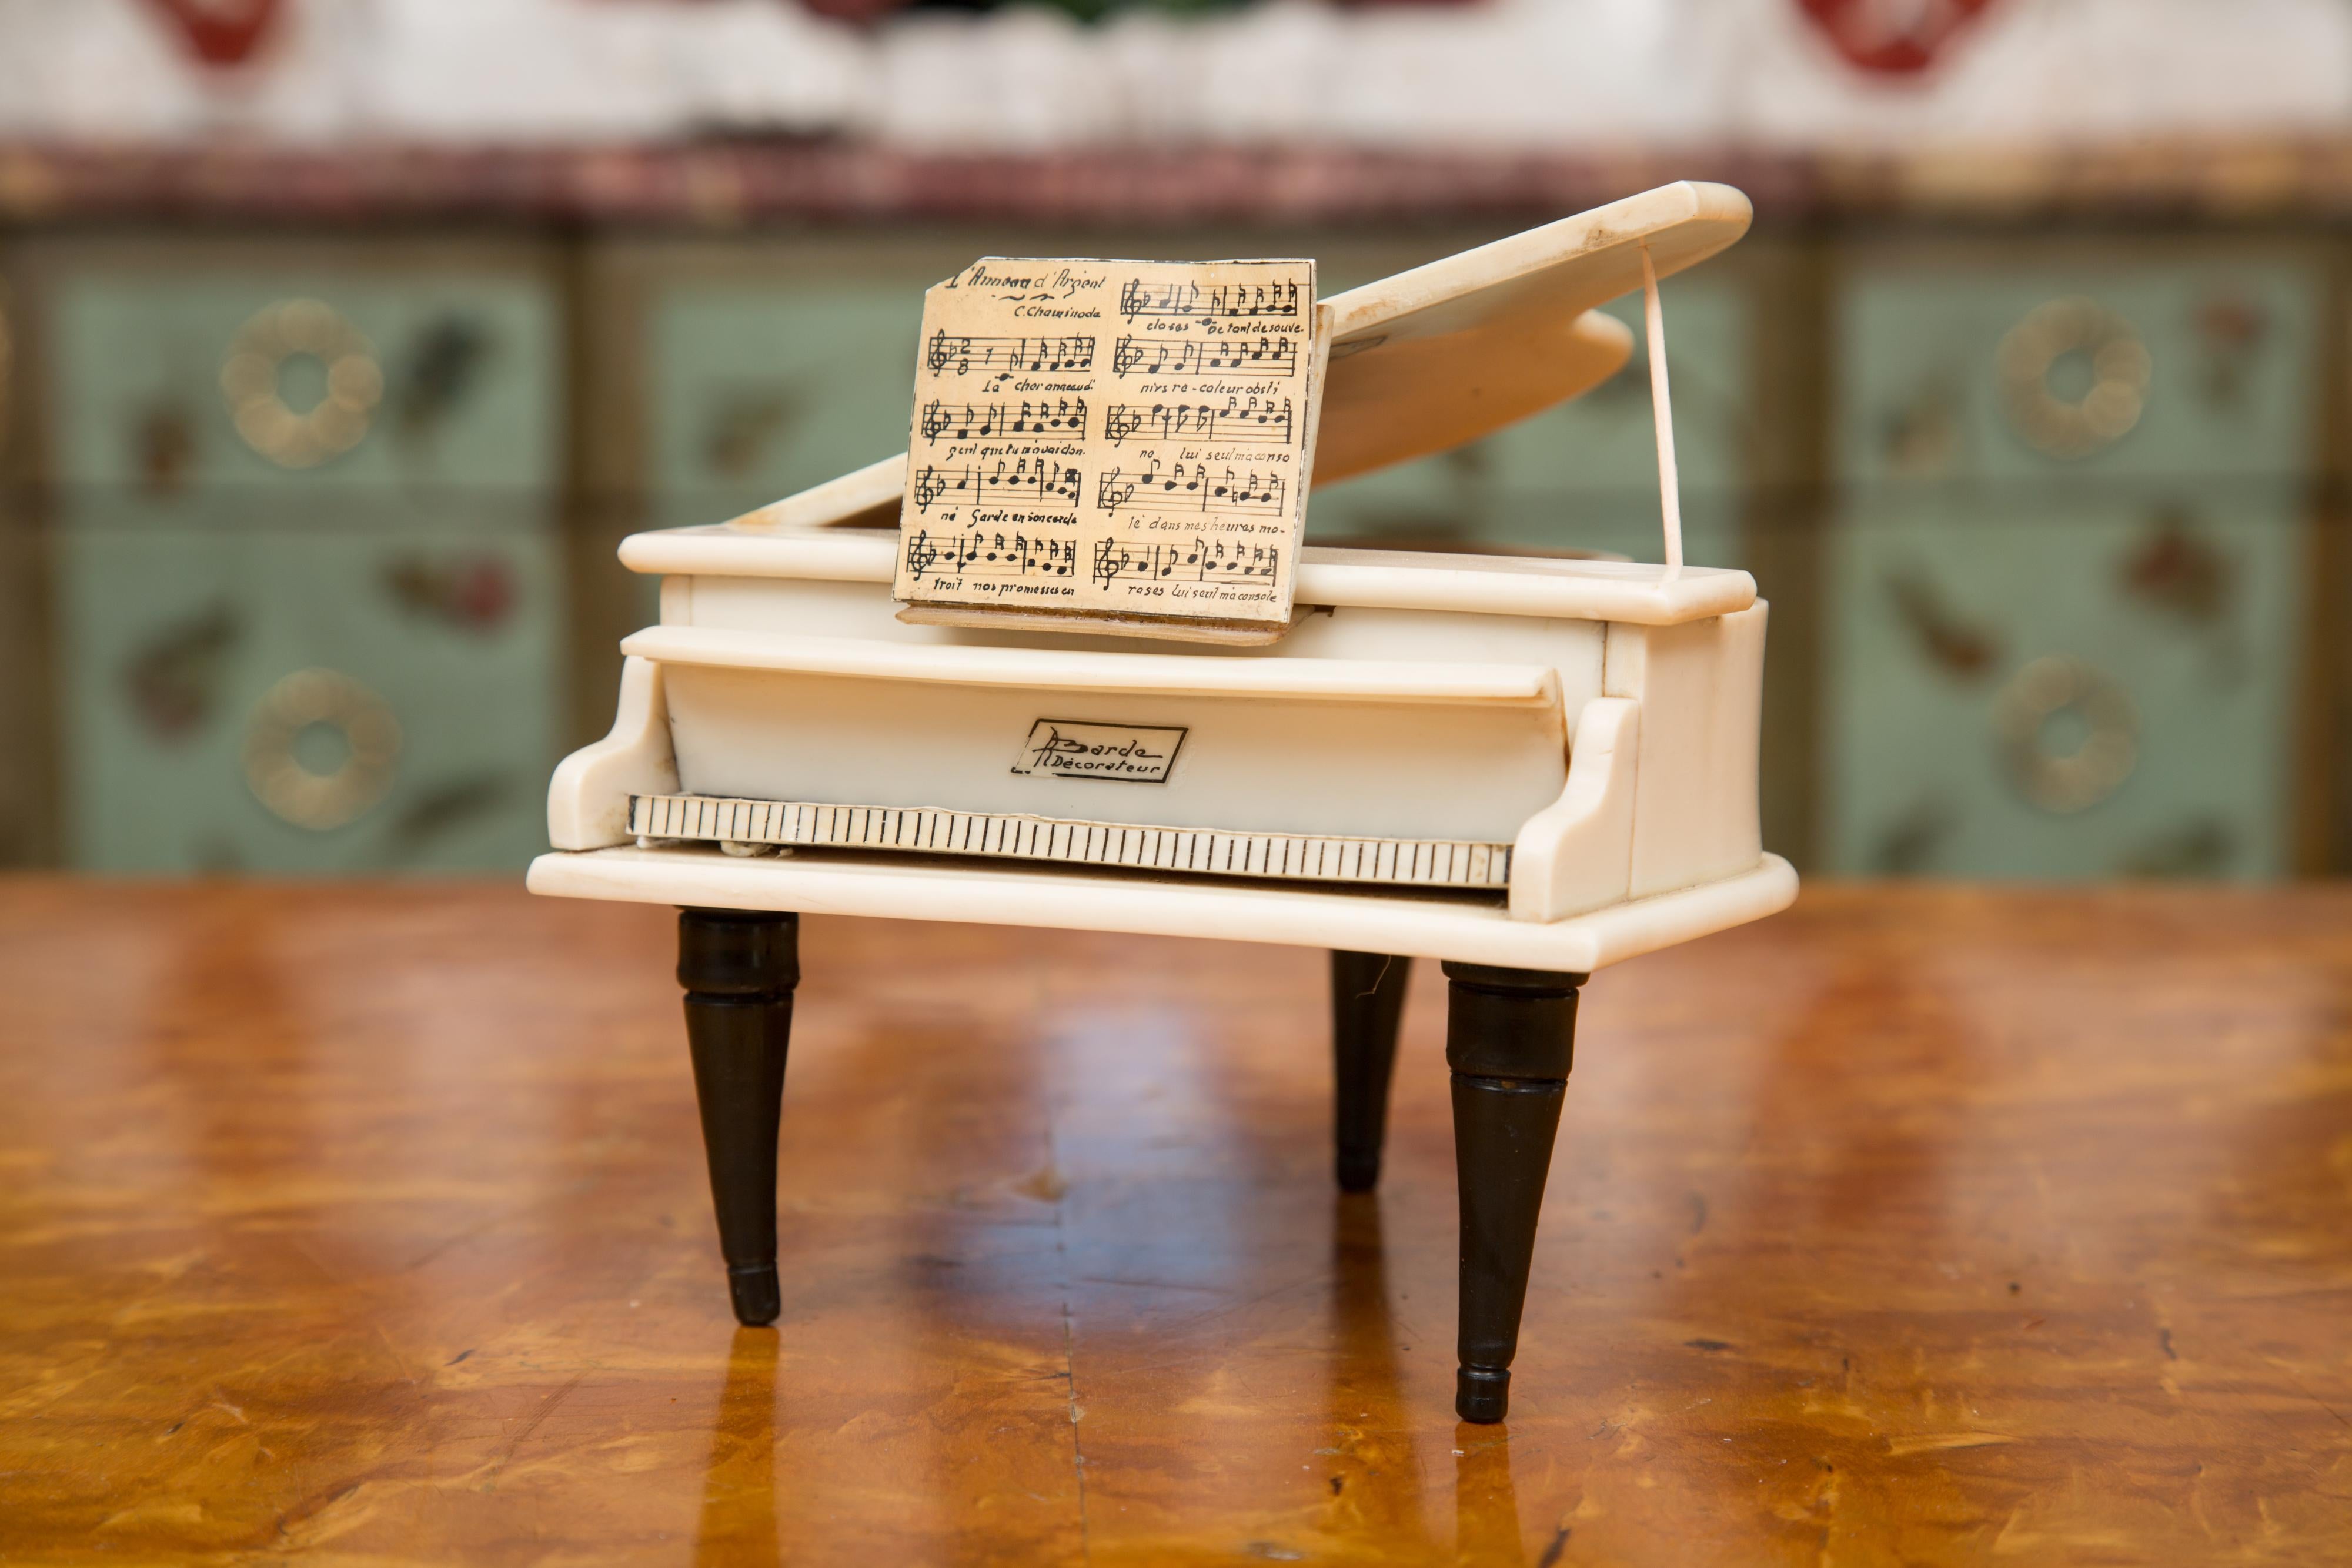 French Limited Edition Bakelite Minature Piano For Sale 2